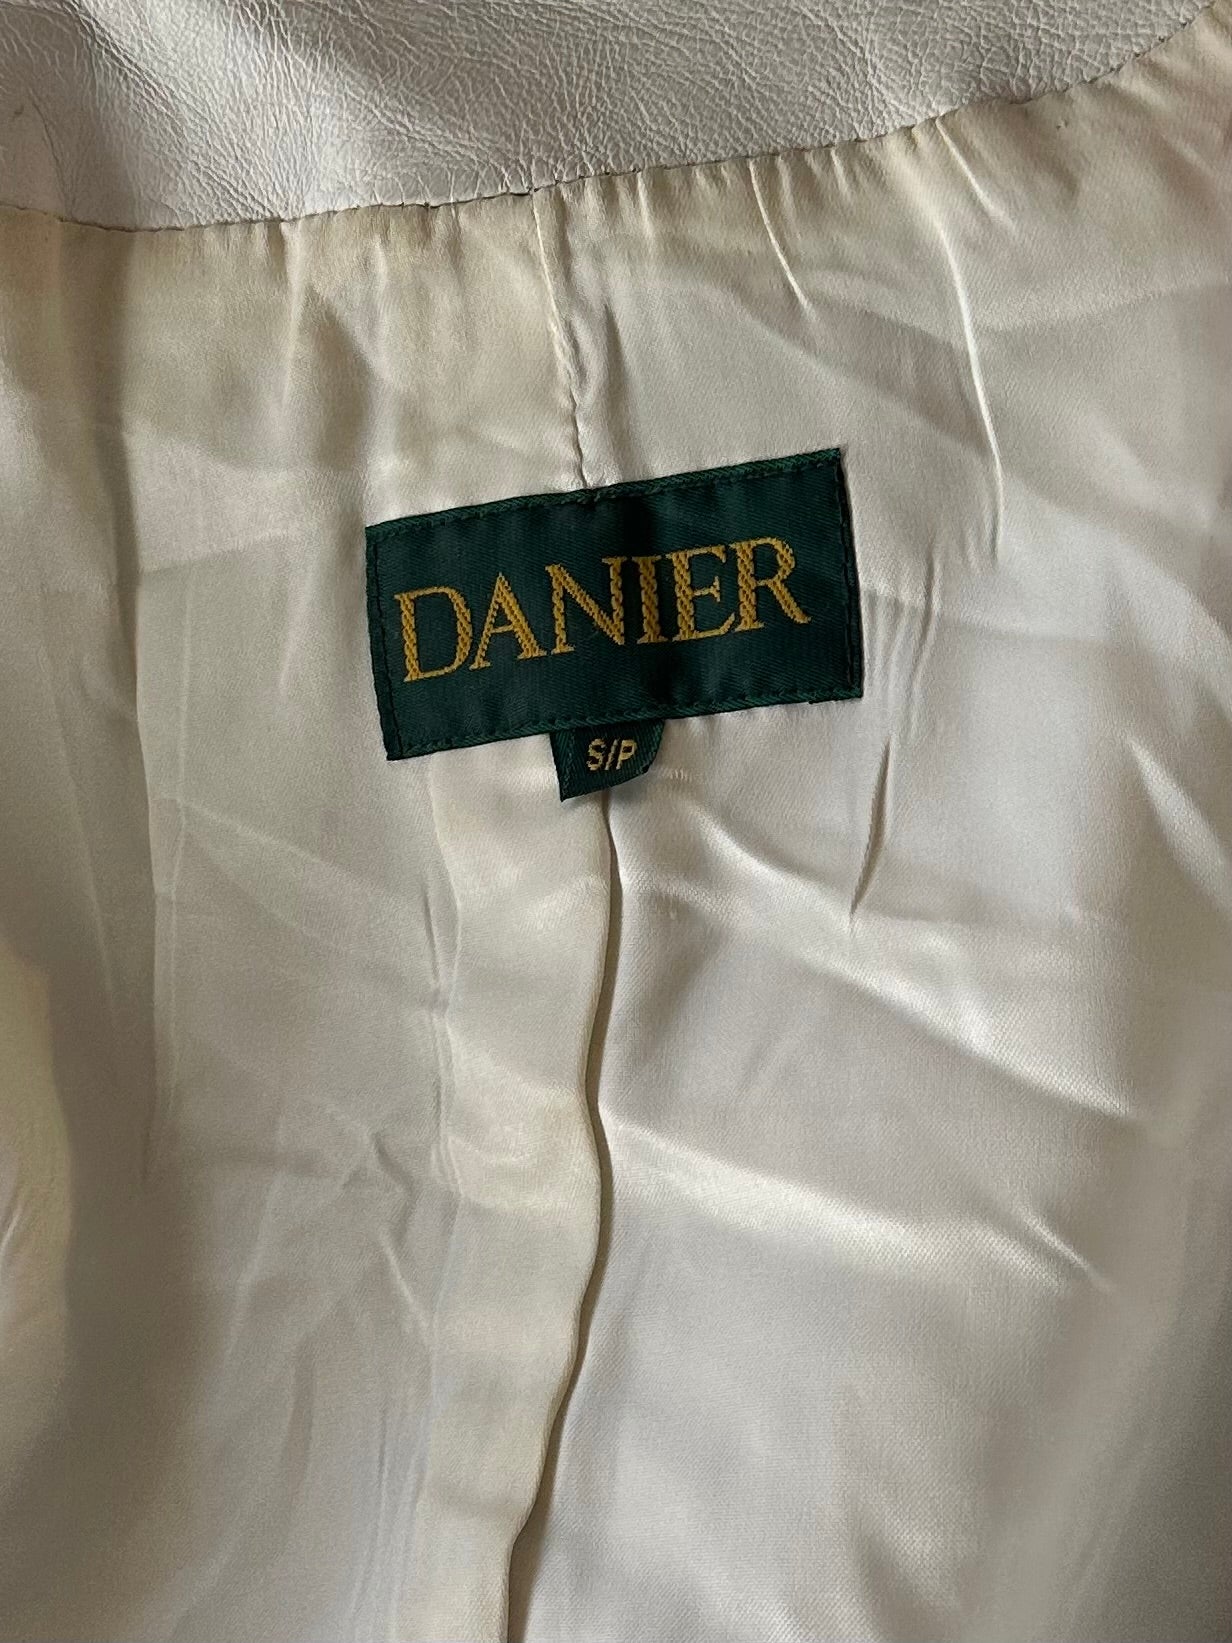 90s 'Danier' White Leather Jacket / Small